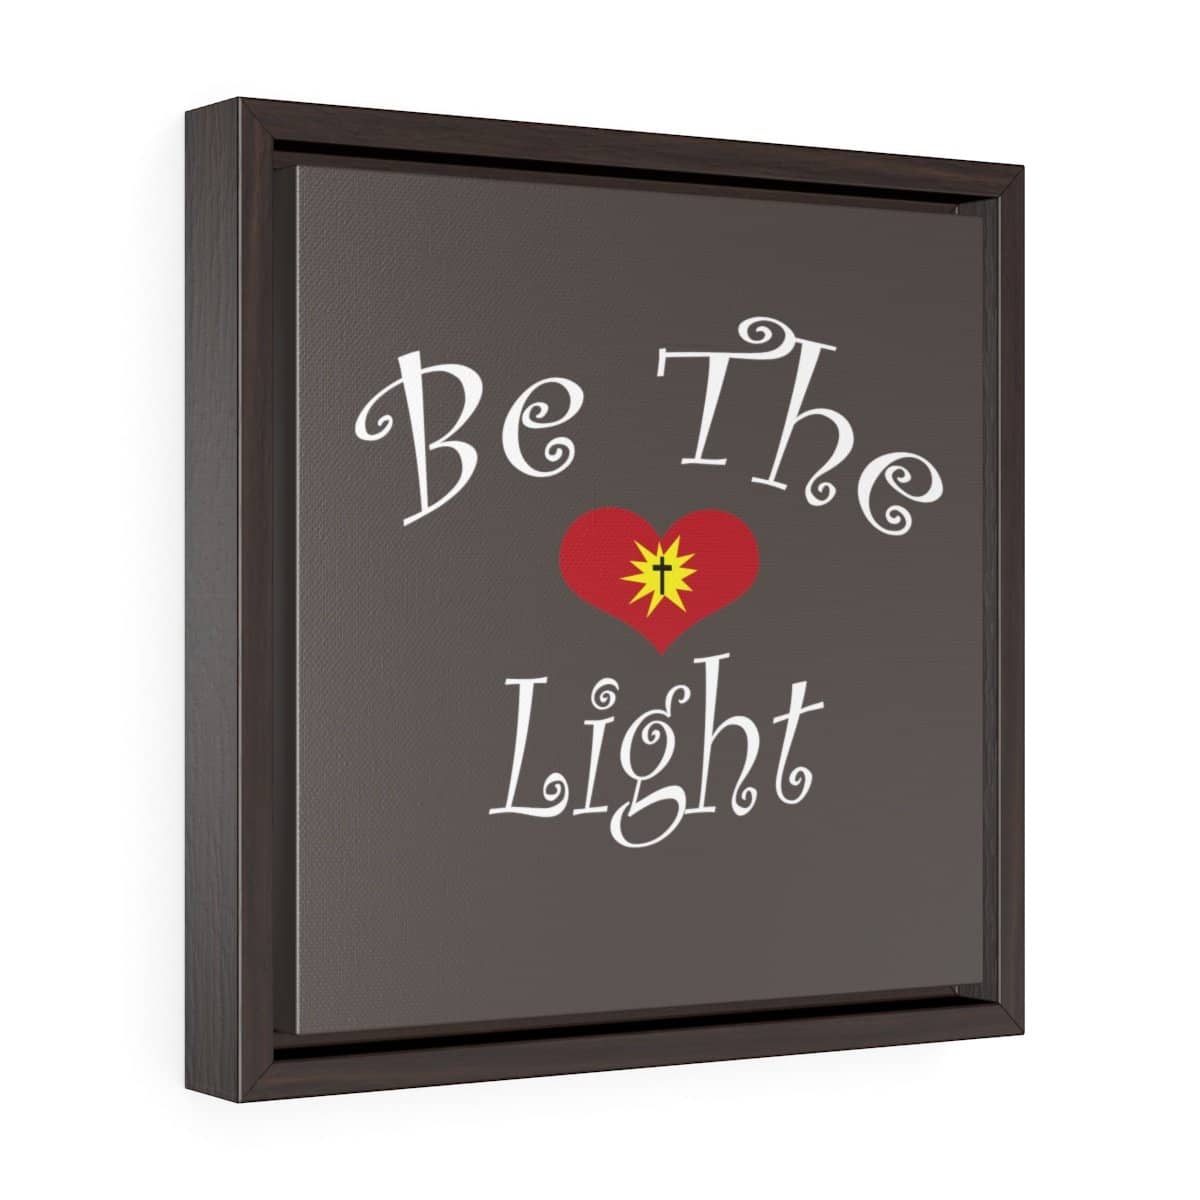 Square Framed Premium Gallery Wrap Canvas "Be the Light" Free Shipping (4292130242654)